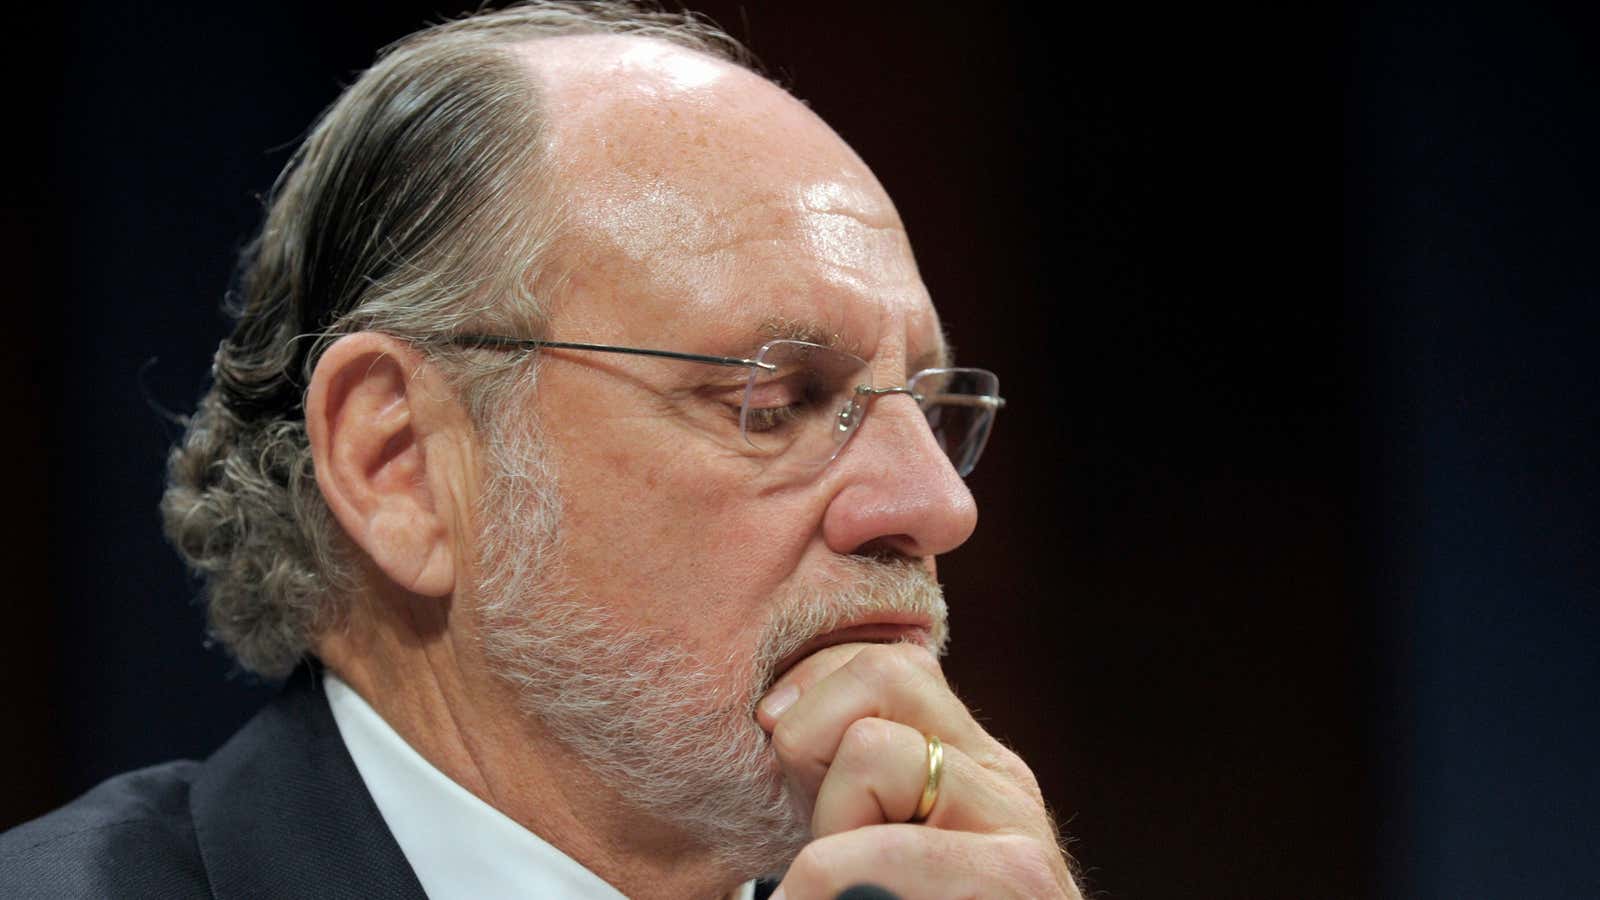 Another thrashing for Corzine.